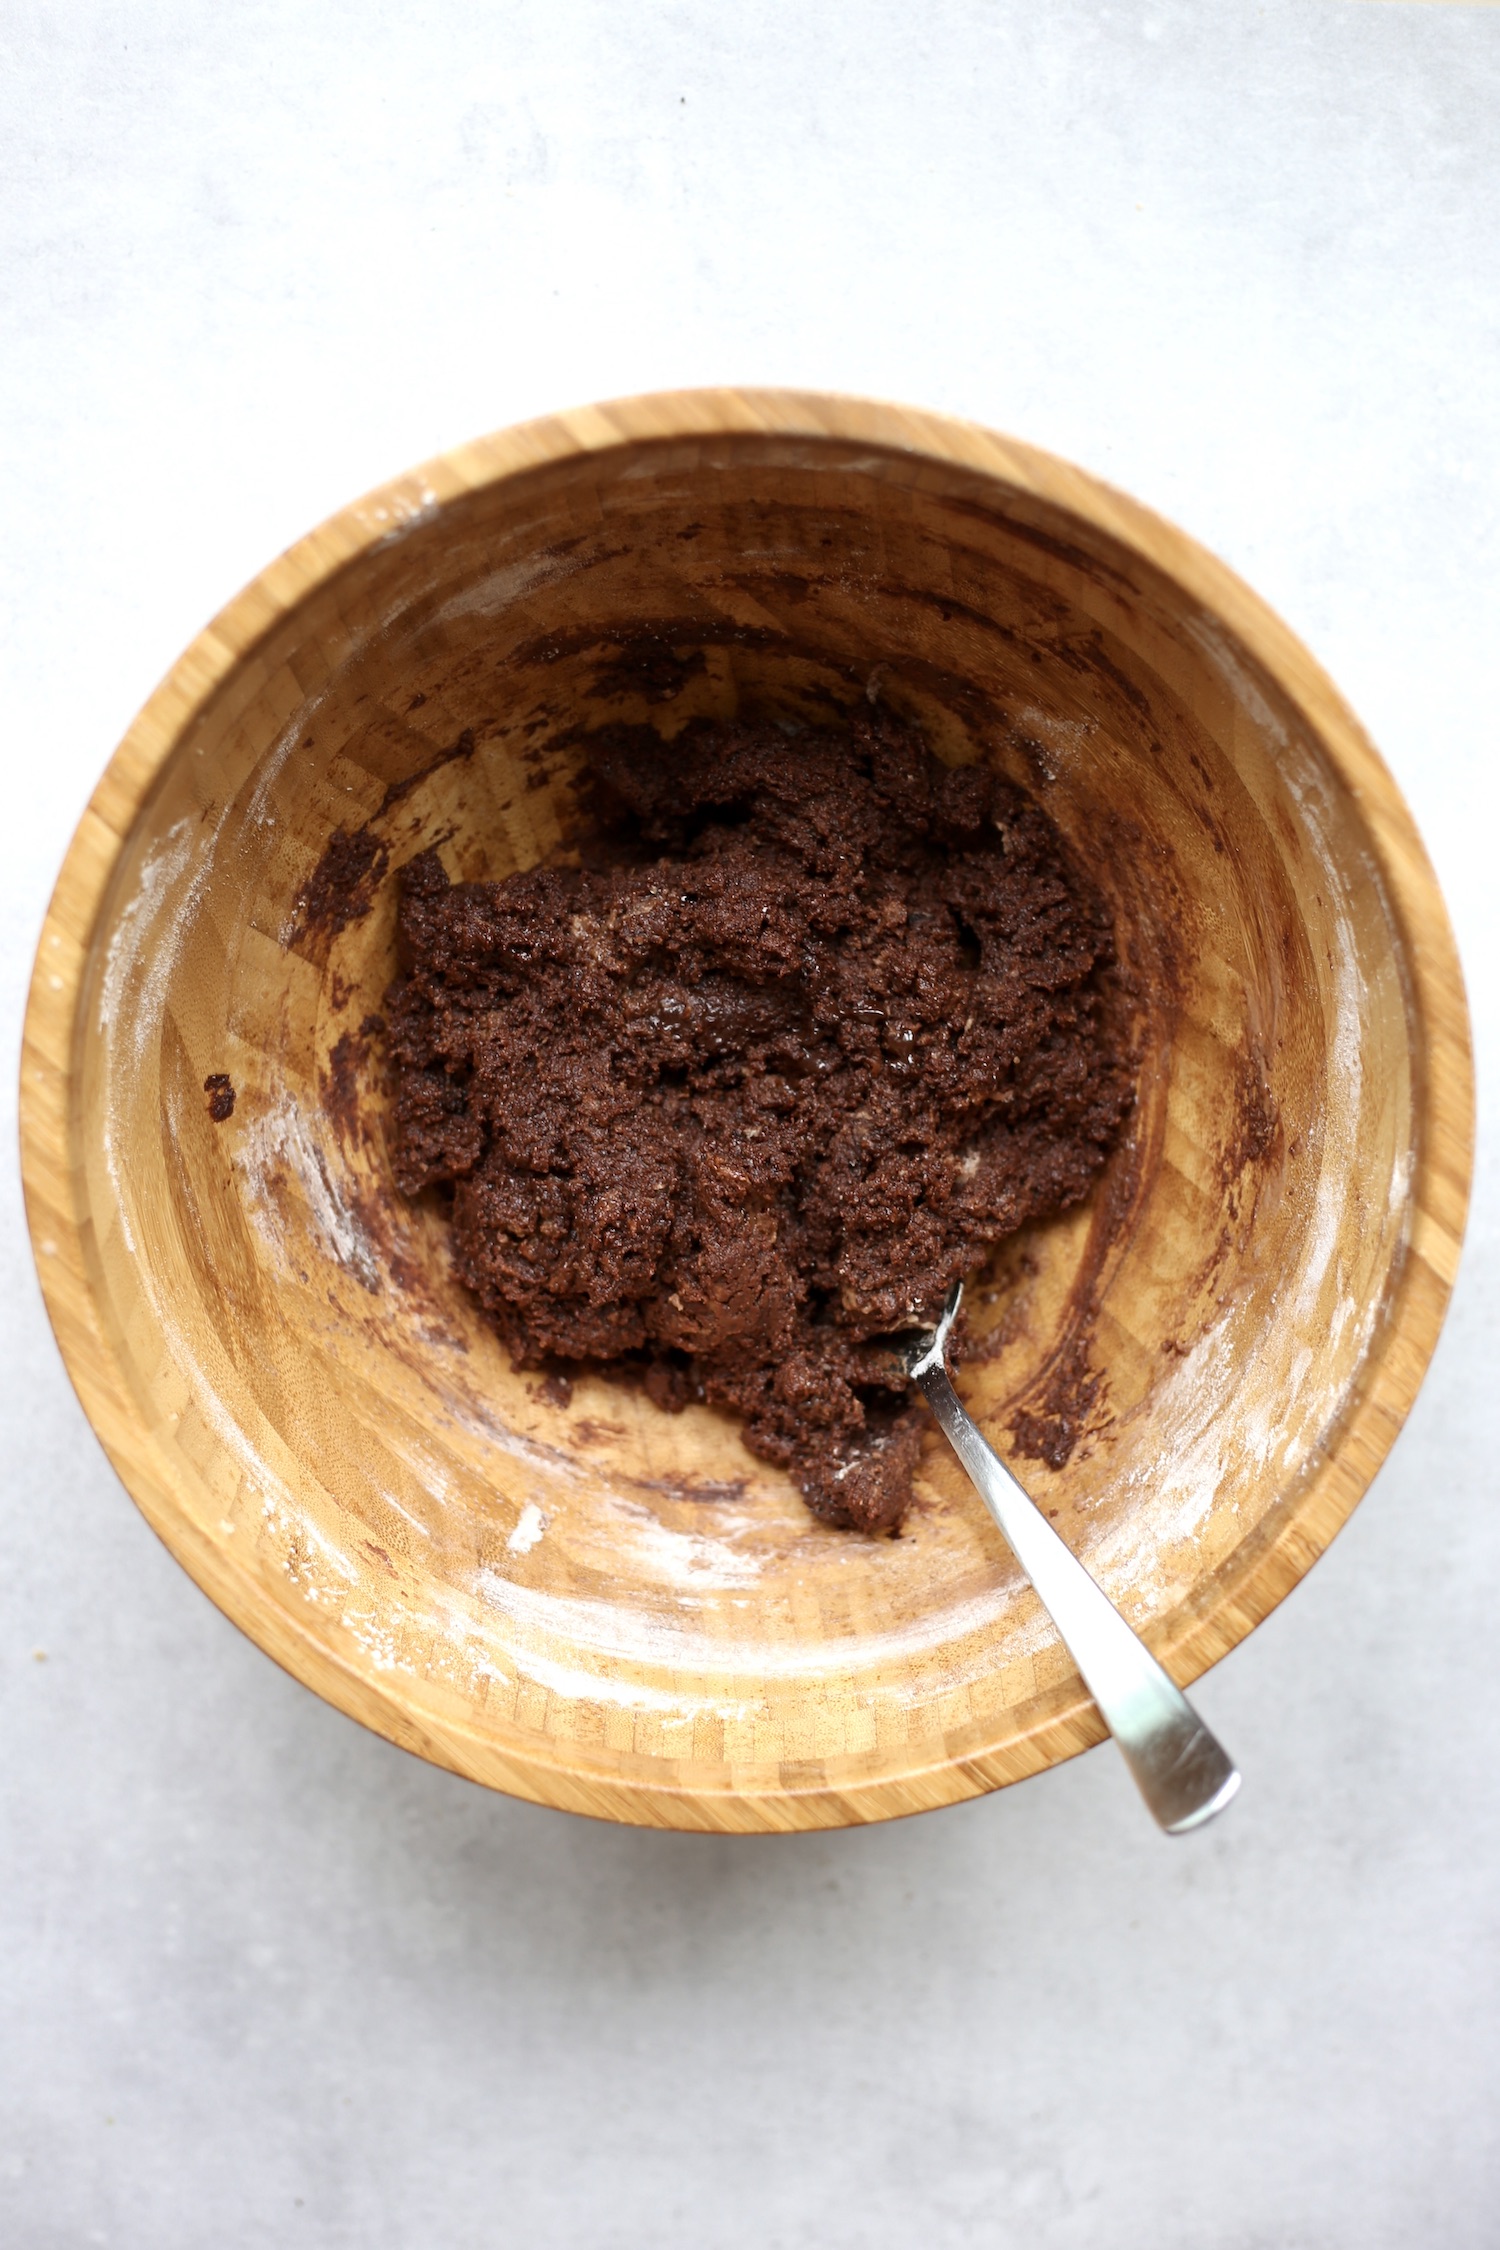 In a large wooden mixing bowl, stir the vegan brownie batter together with a metal spoon. 